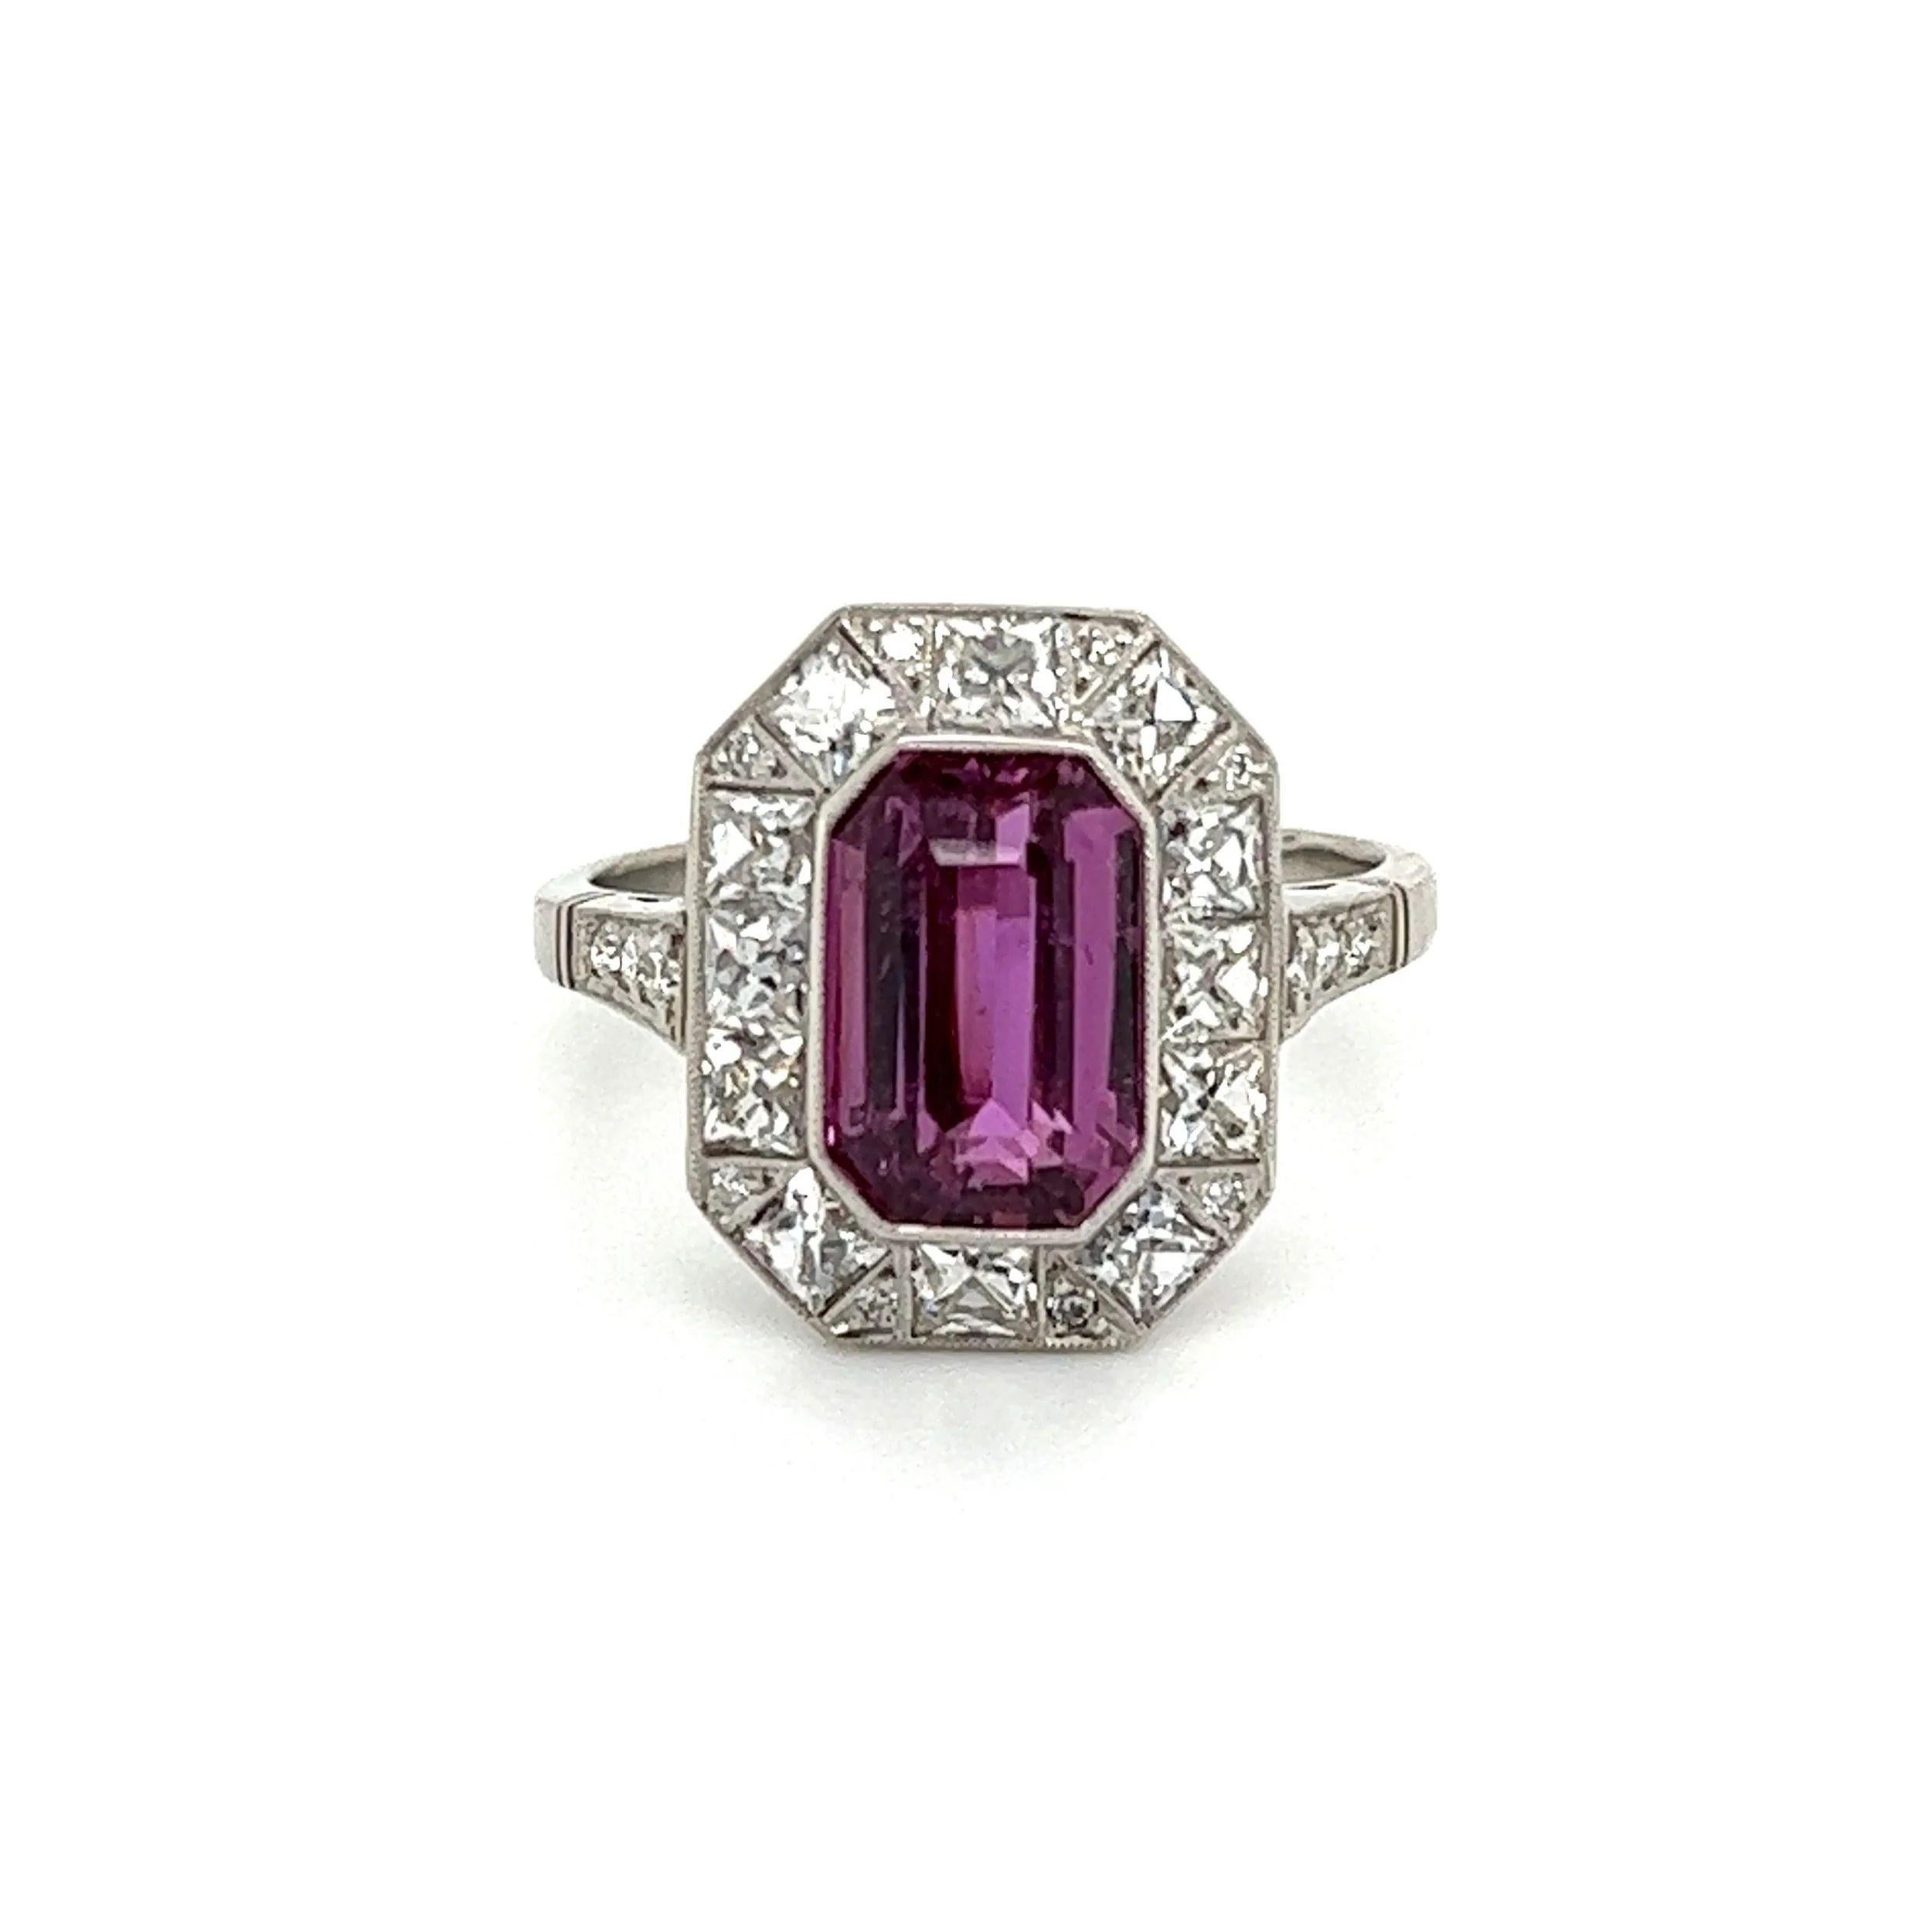 Simply Beautiful! Finely detailed Emerald Cut Purple Pink Sapphire and Diamond Platinum Vintage Cocktail Ring. Centering a securely nestled Emerald-Cut Purple Pink Sapphire, weighing approx. 3.04 Carats. Surrounded by Diamonds, weighing approx.